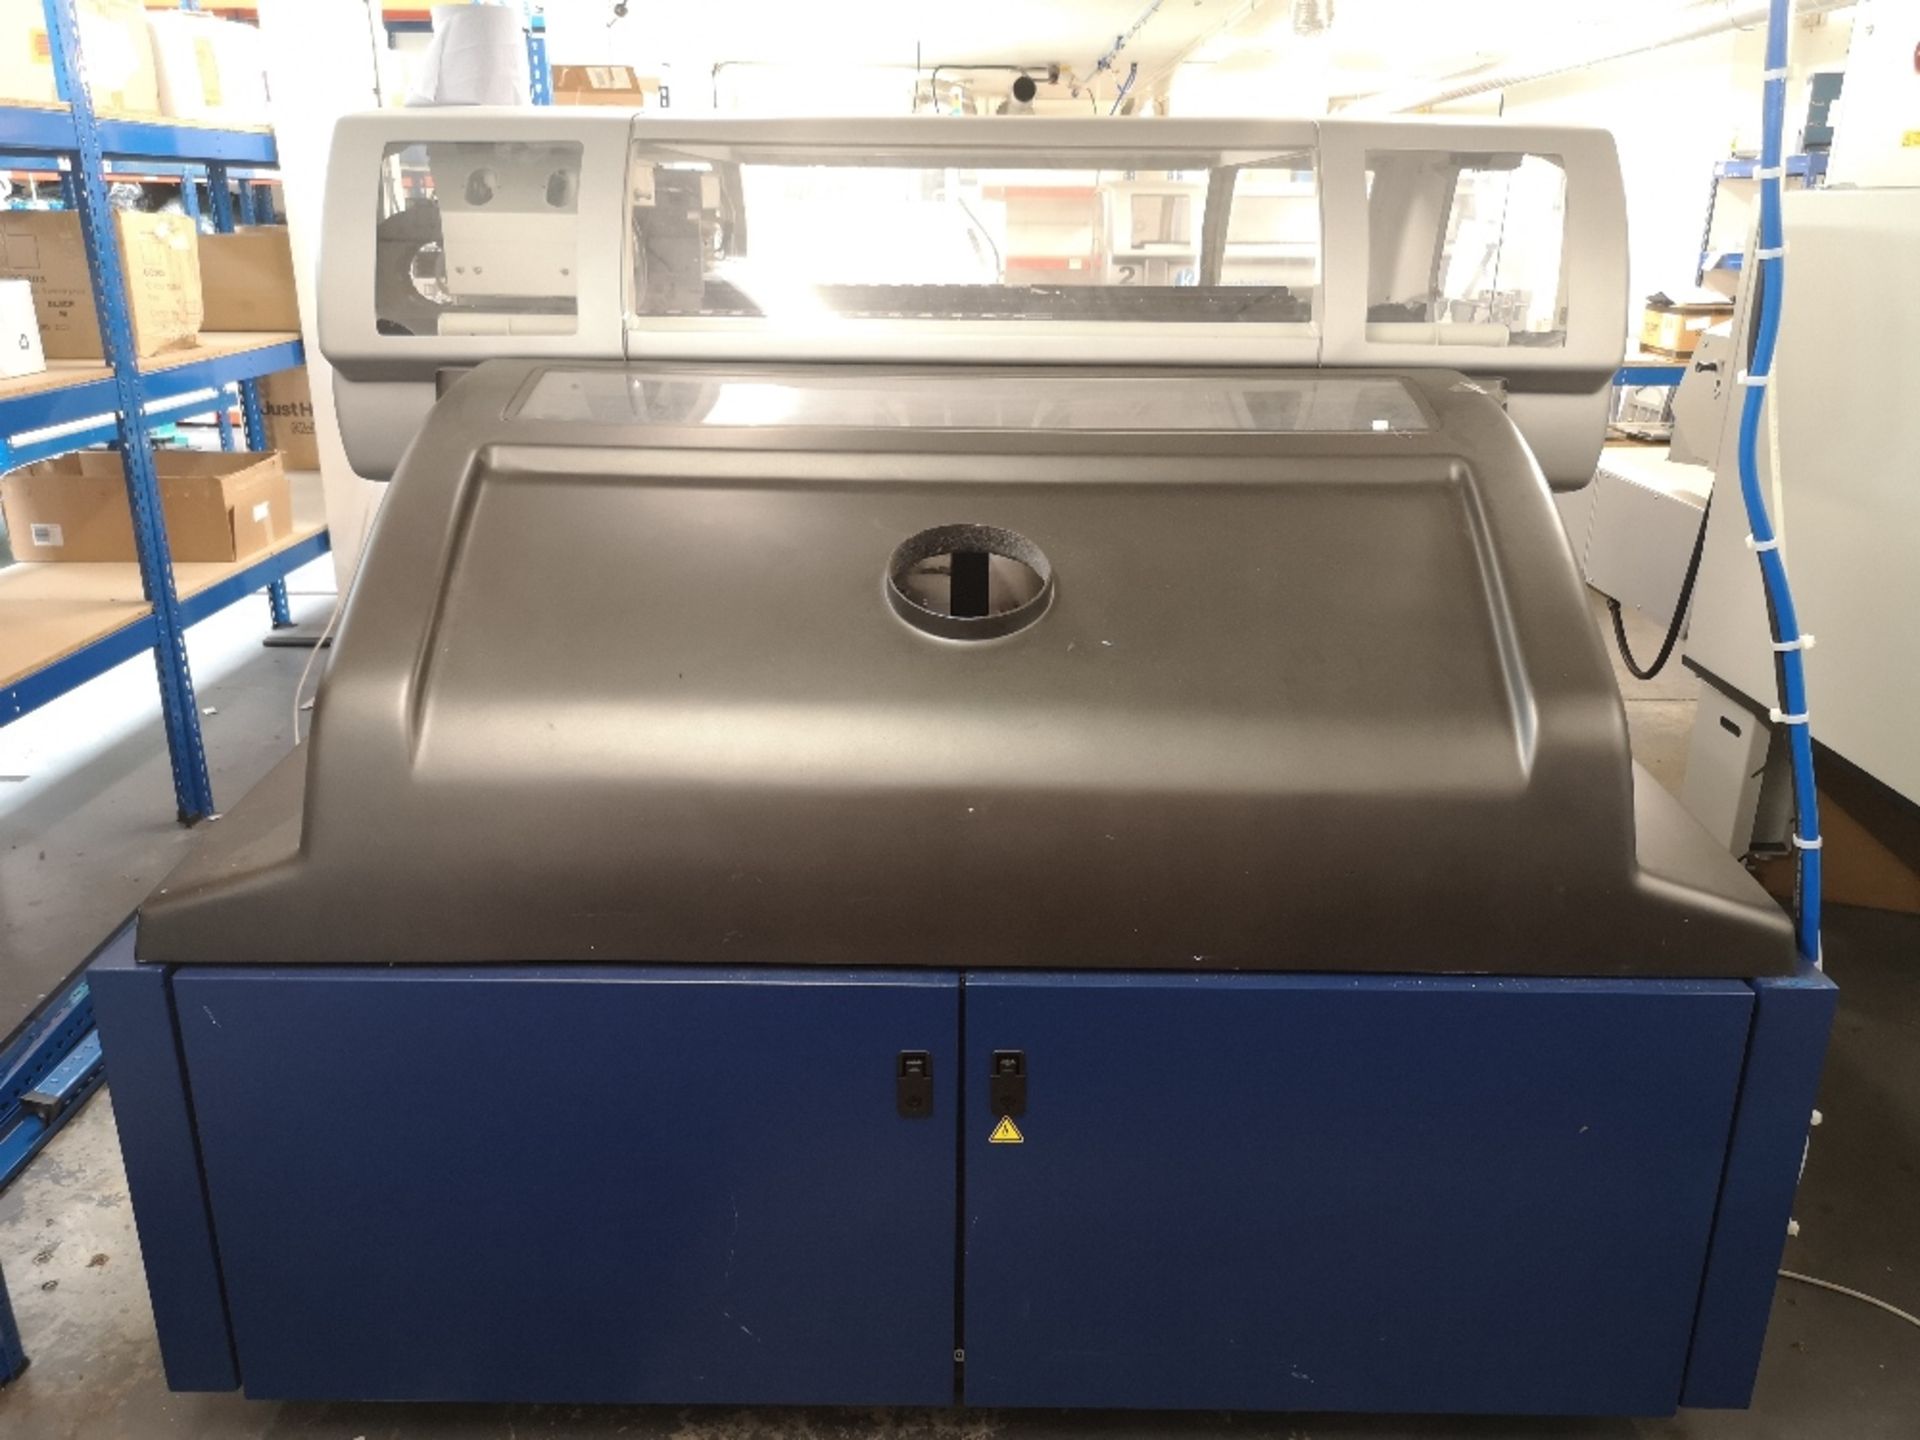 Kornit Avalanche HD6 Series Direct to Garment Printer (2018) - Image 5 of 9